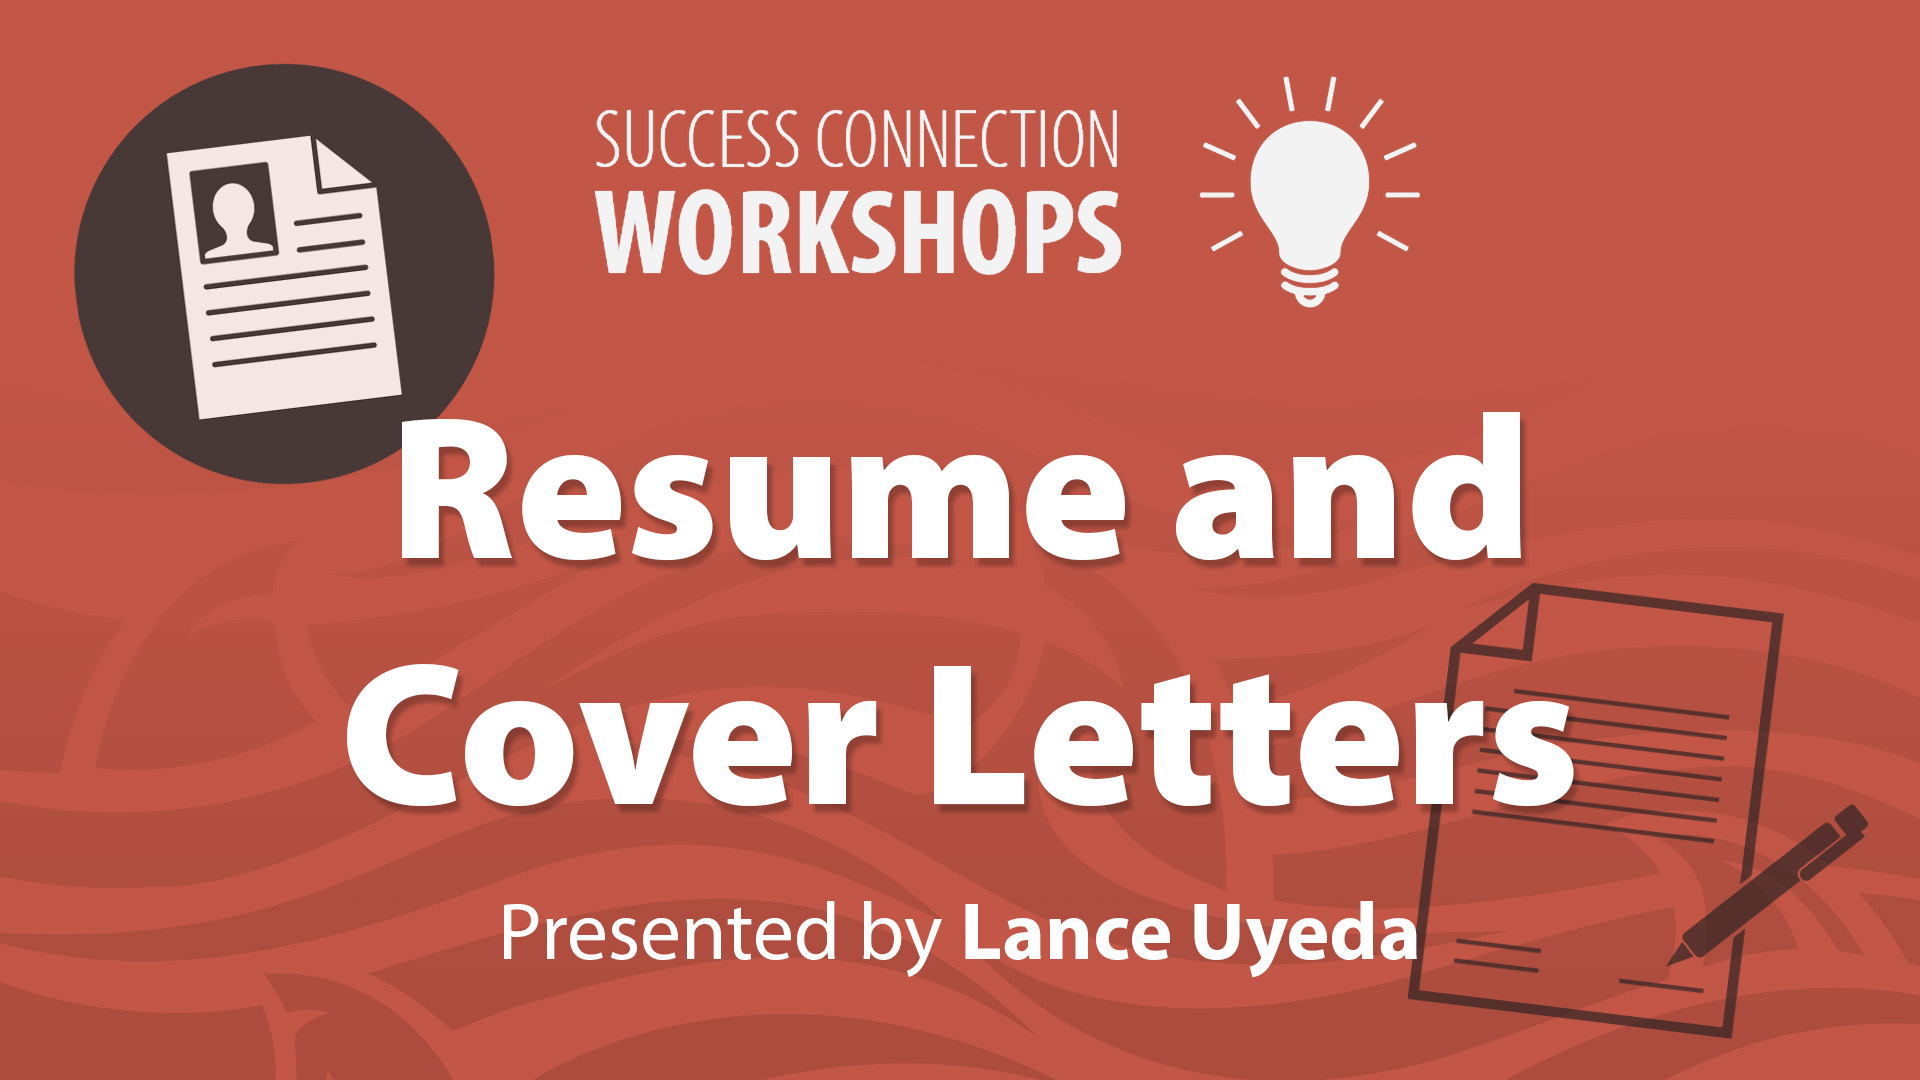 Success Connection Workshops Resume and Cover Letters